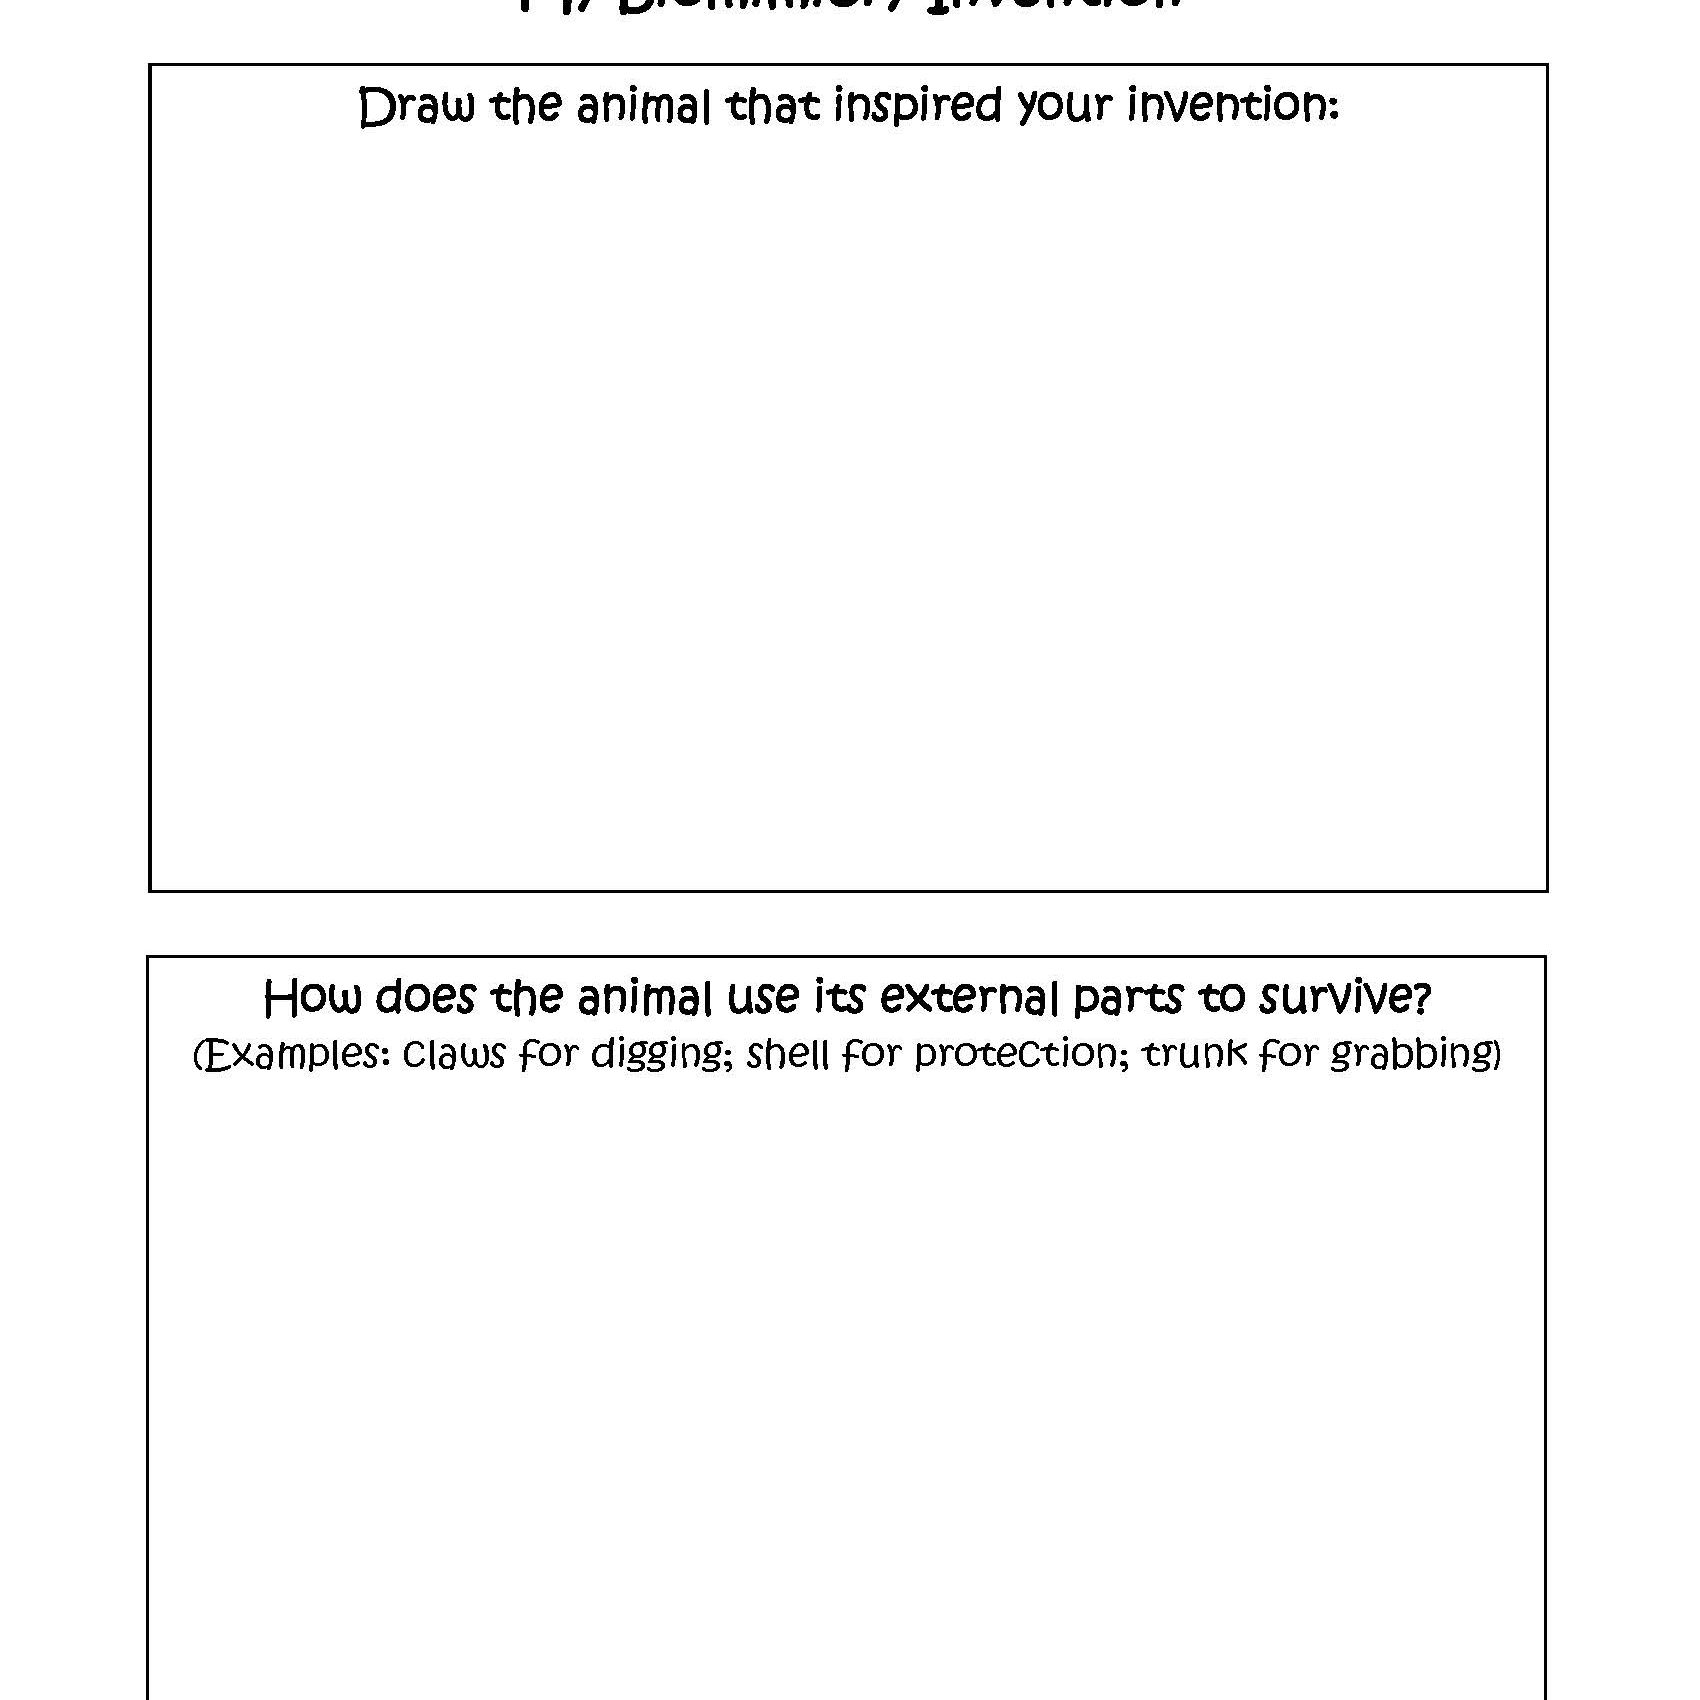 My Biomimicry Invention Worksheet_Page_1